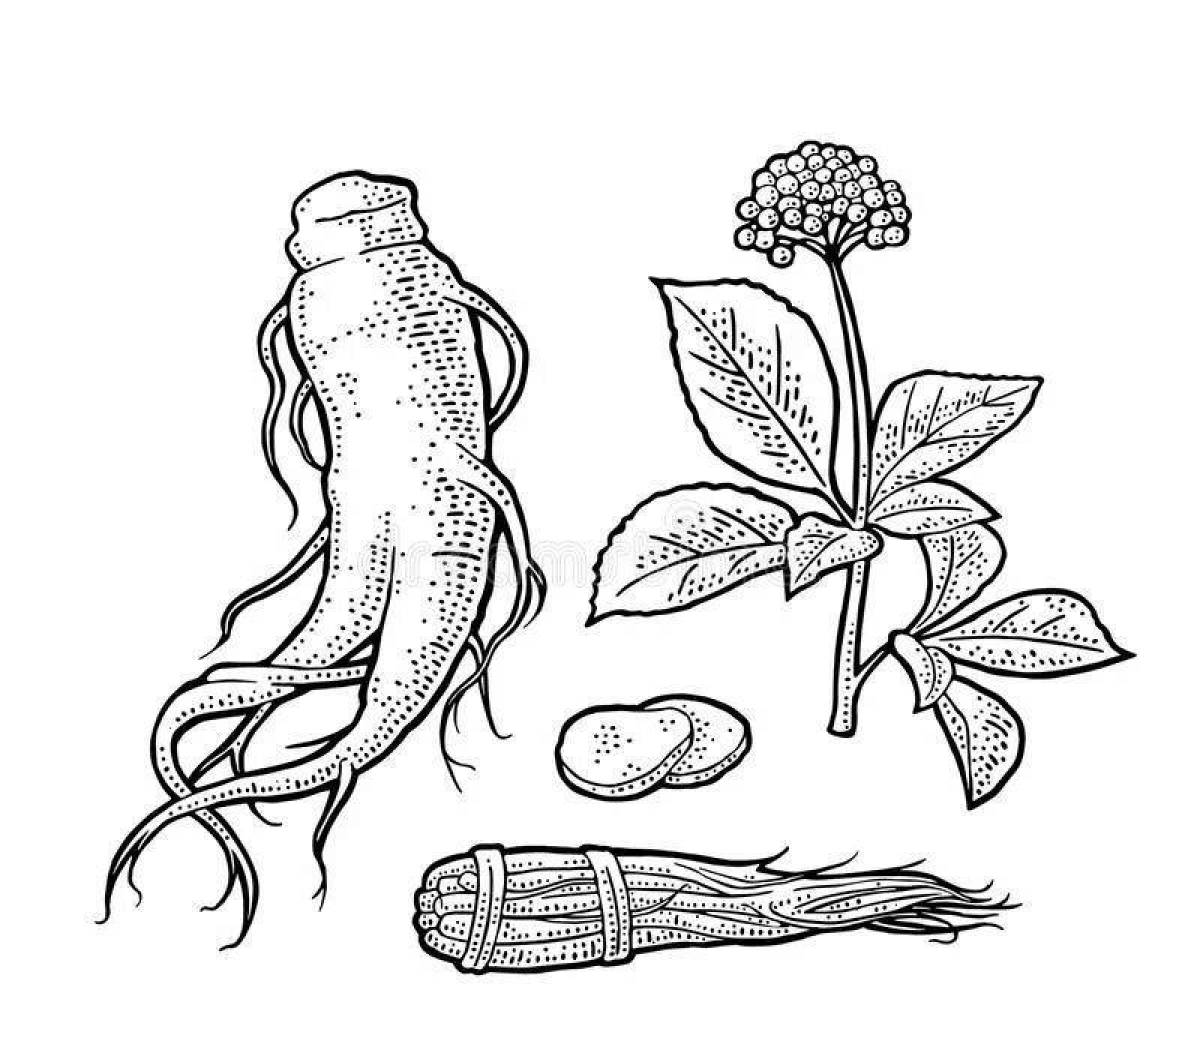 Adorable ginseng coloring page